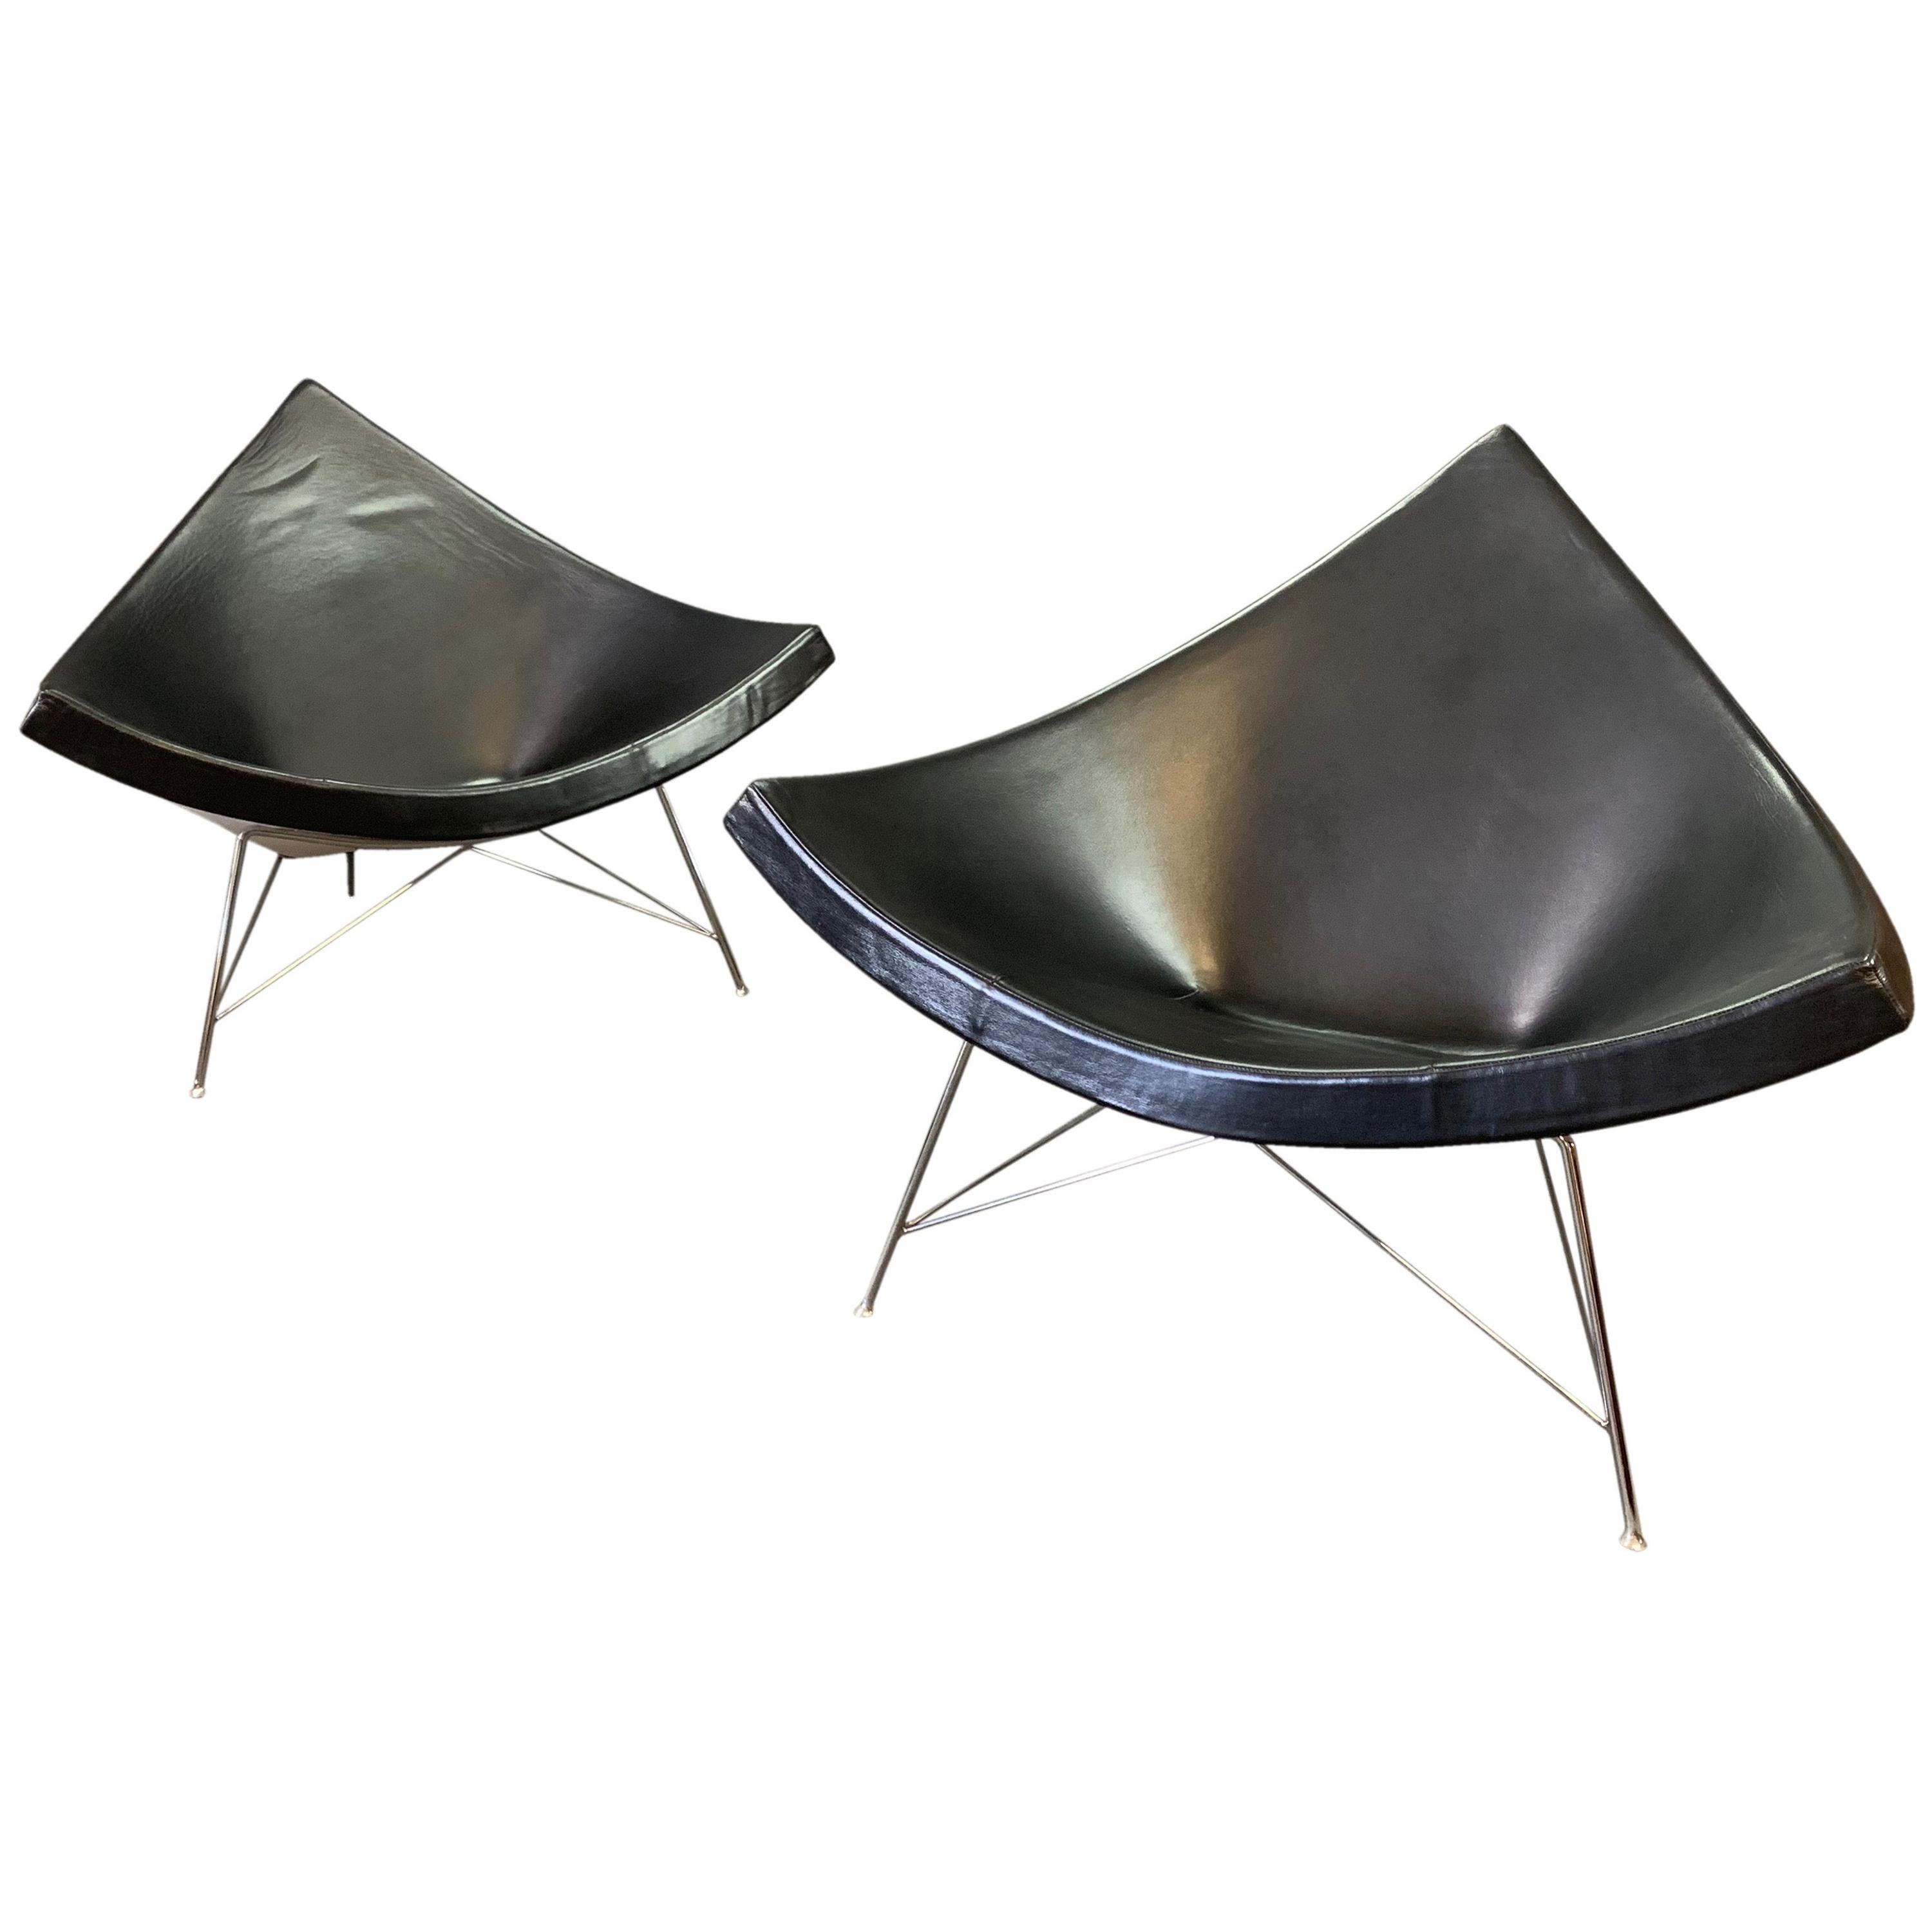 Pair of Vintage Mid-Century Modern "Coconut" Chairs by George Nelson for Vitra For Sale